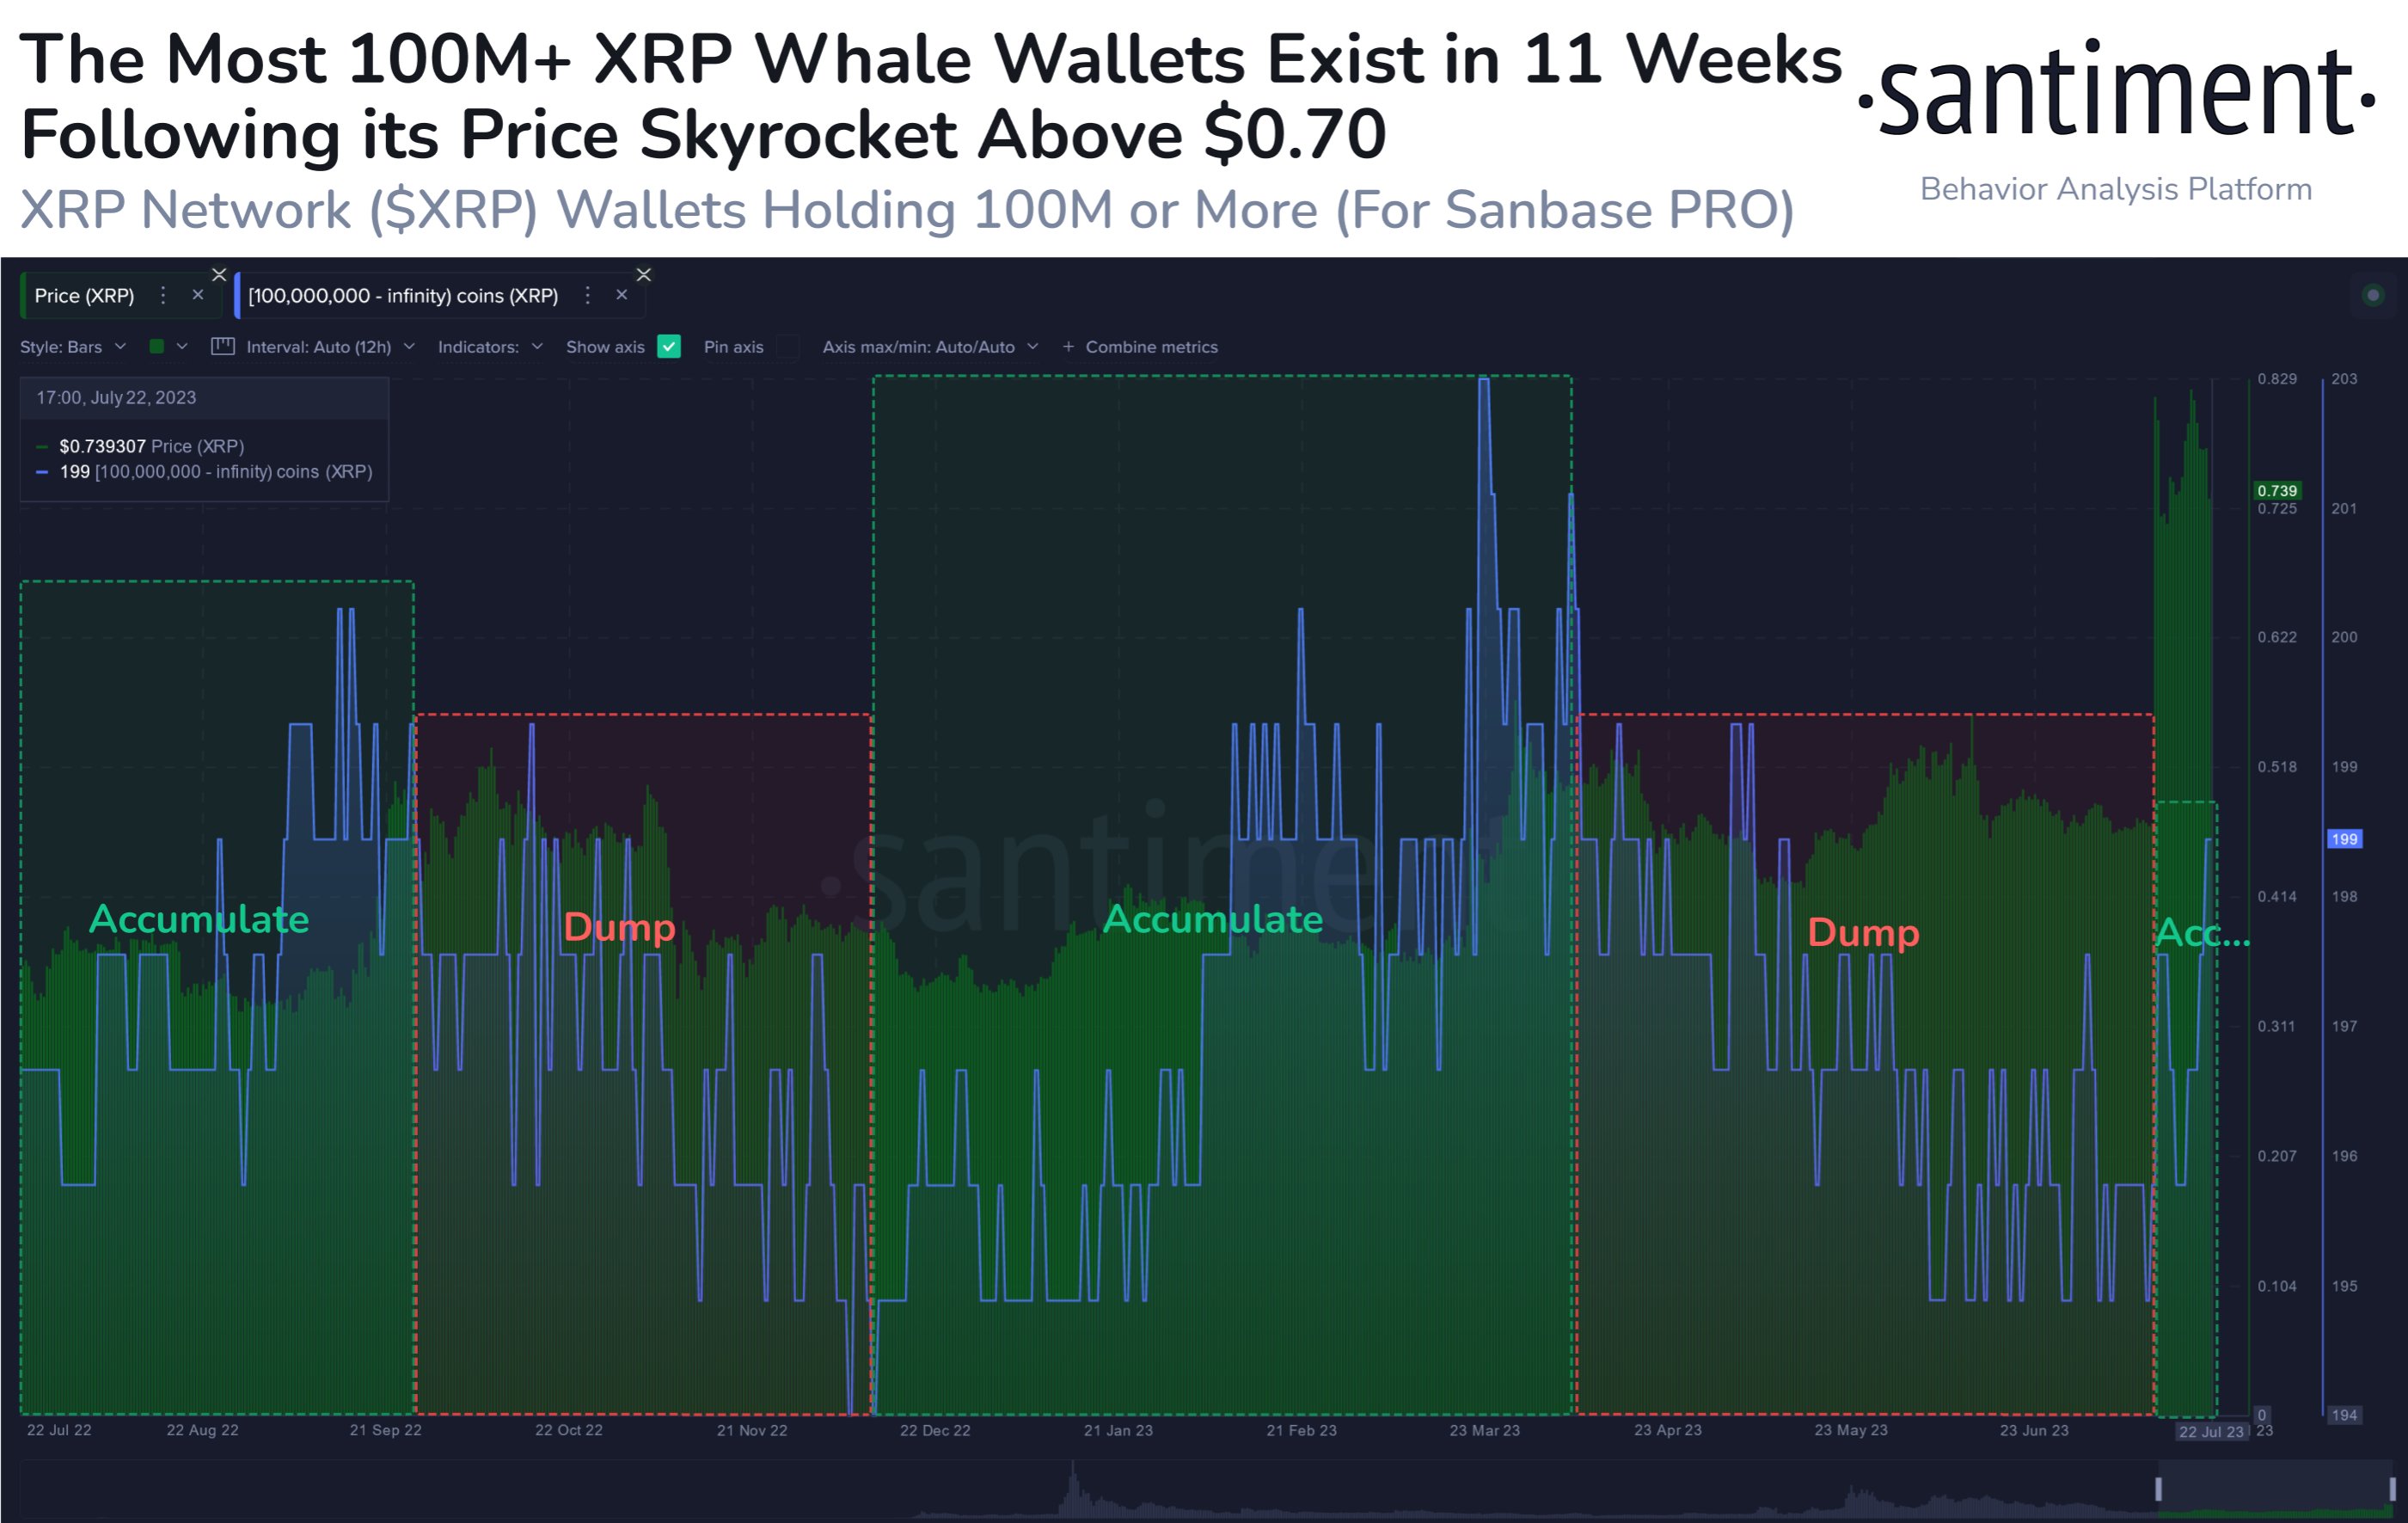 XRP whale wallets holding 100 million+ tokens